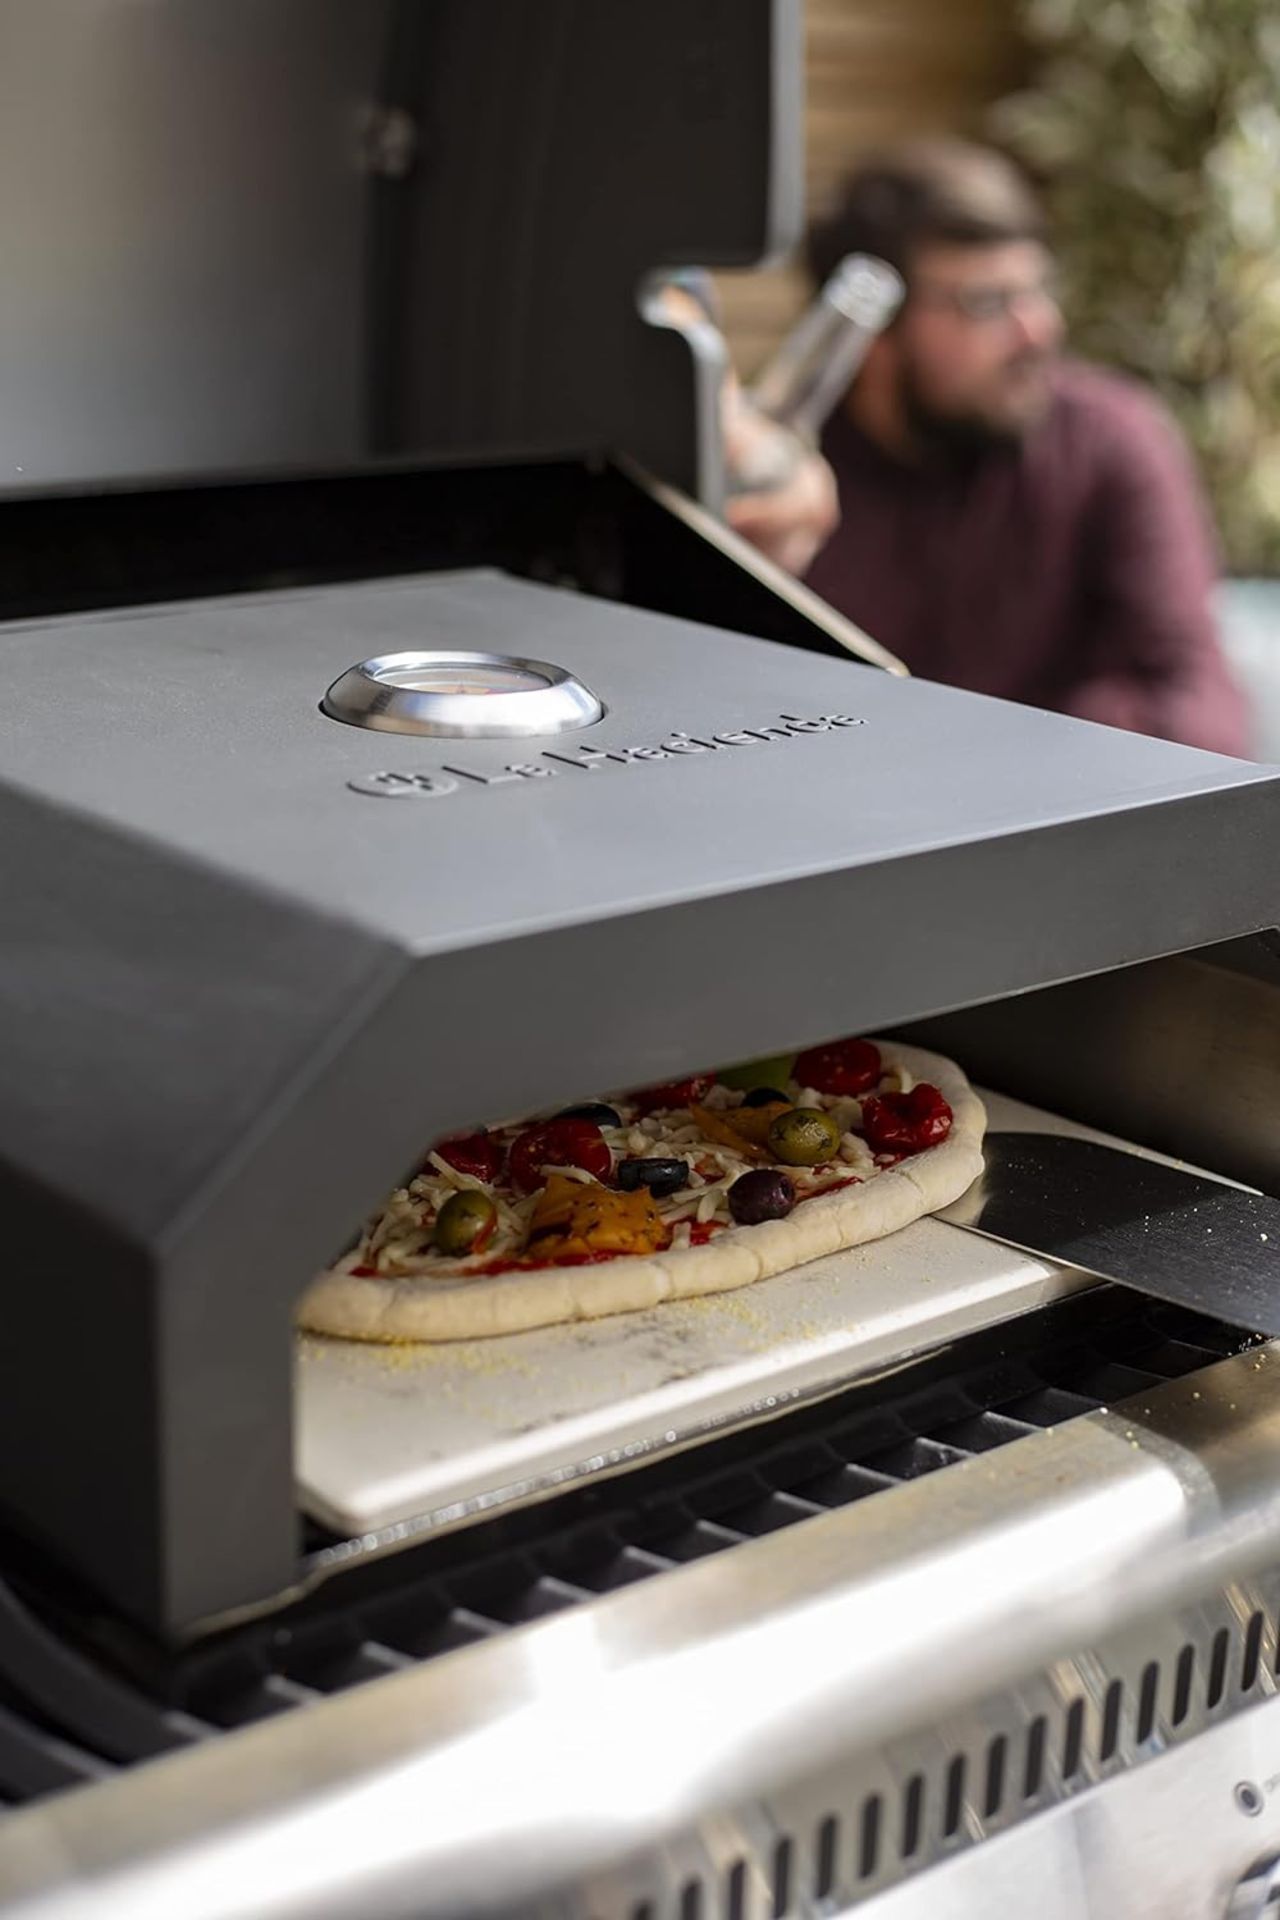 BRAND NEW LA HACIENDA Pizza Oven for Barbecues. RRP £99.99 EACH. The revolutionary BBQ Pizza Oven is - Image 2 of 3